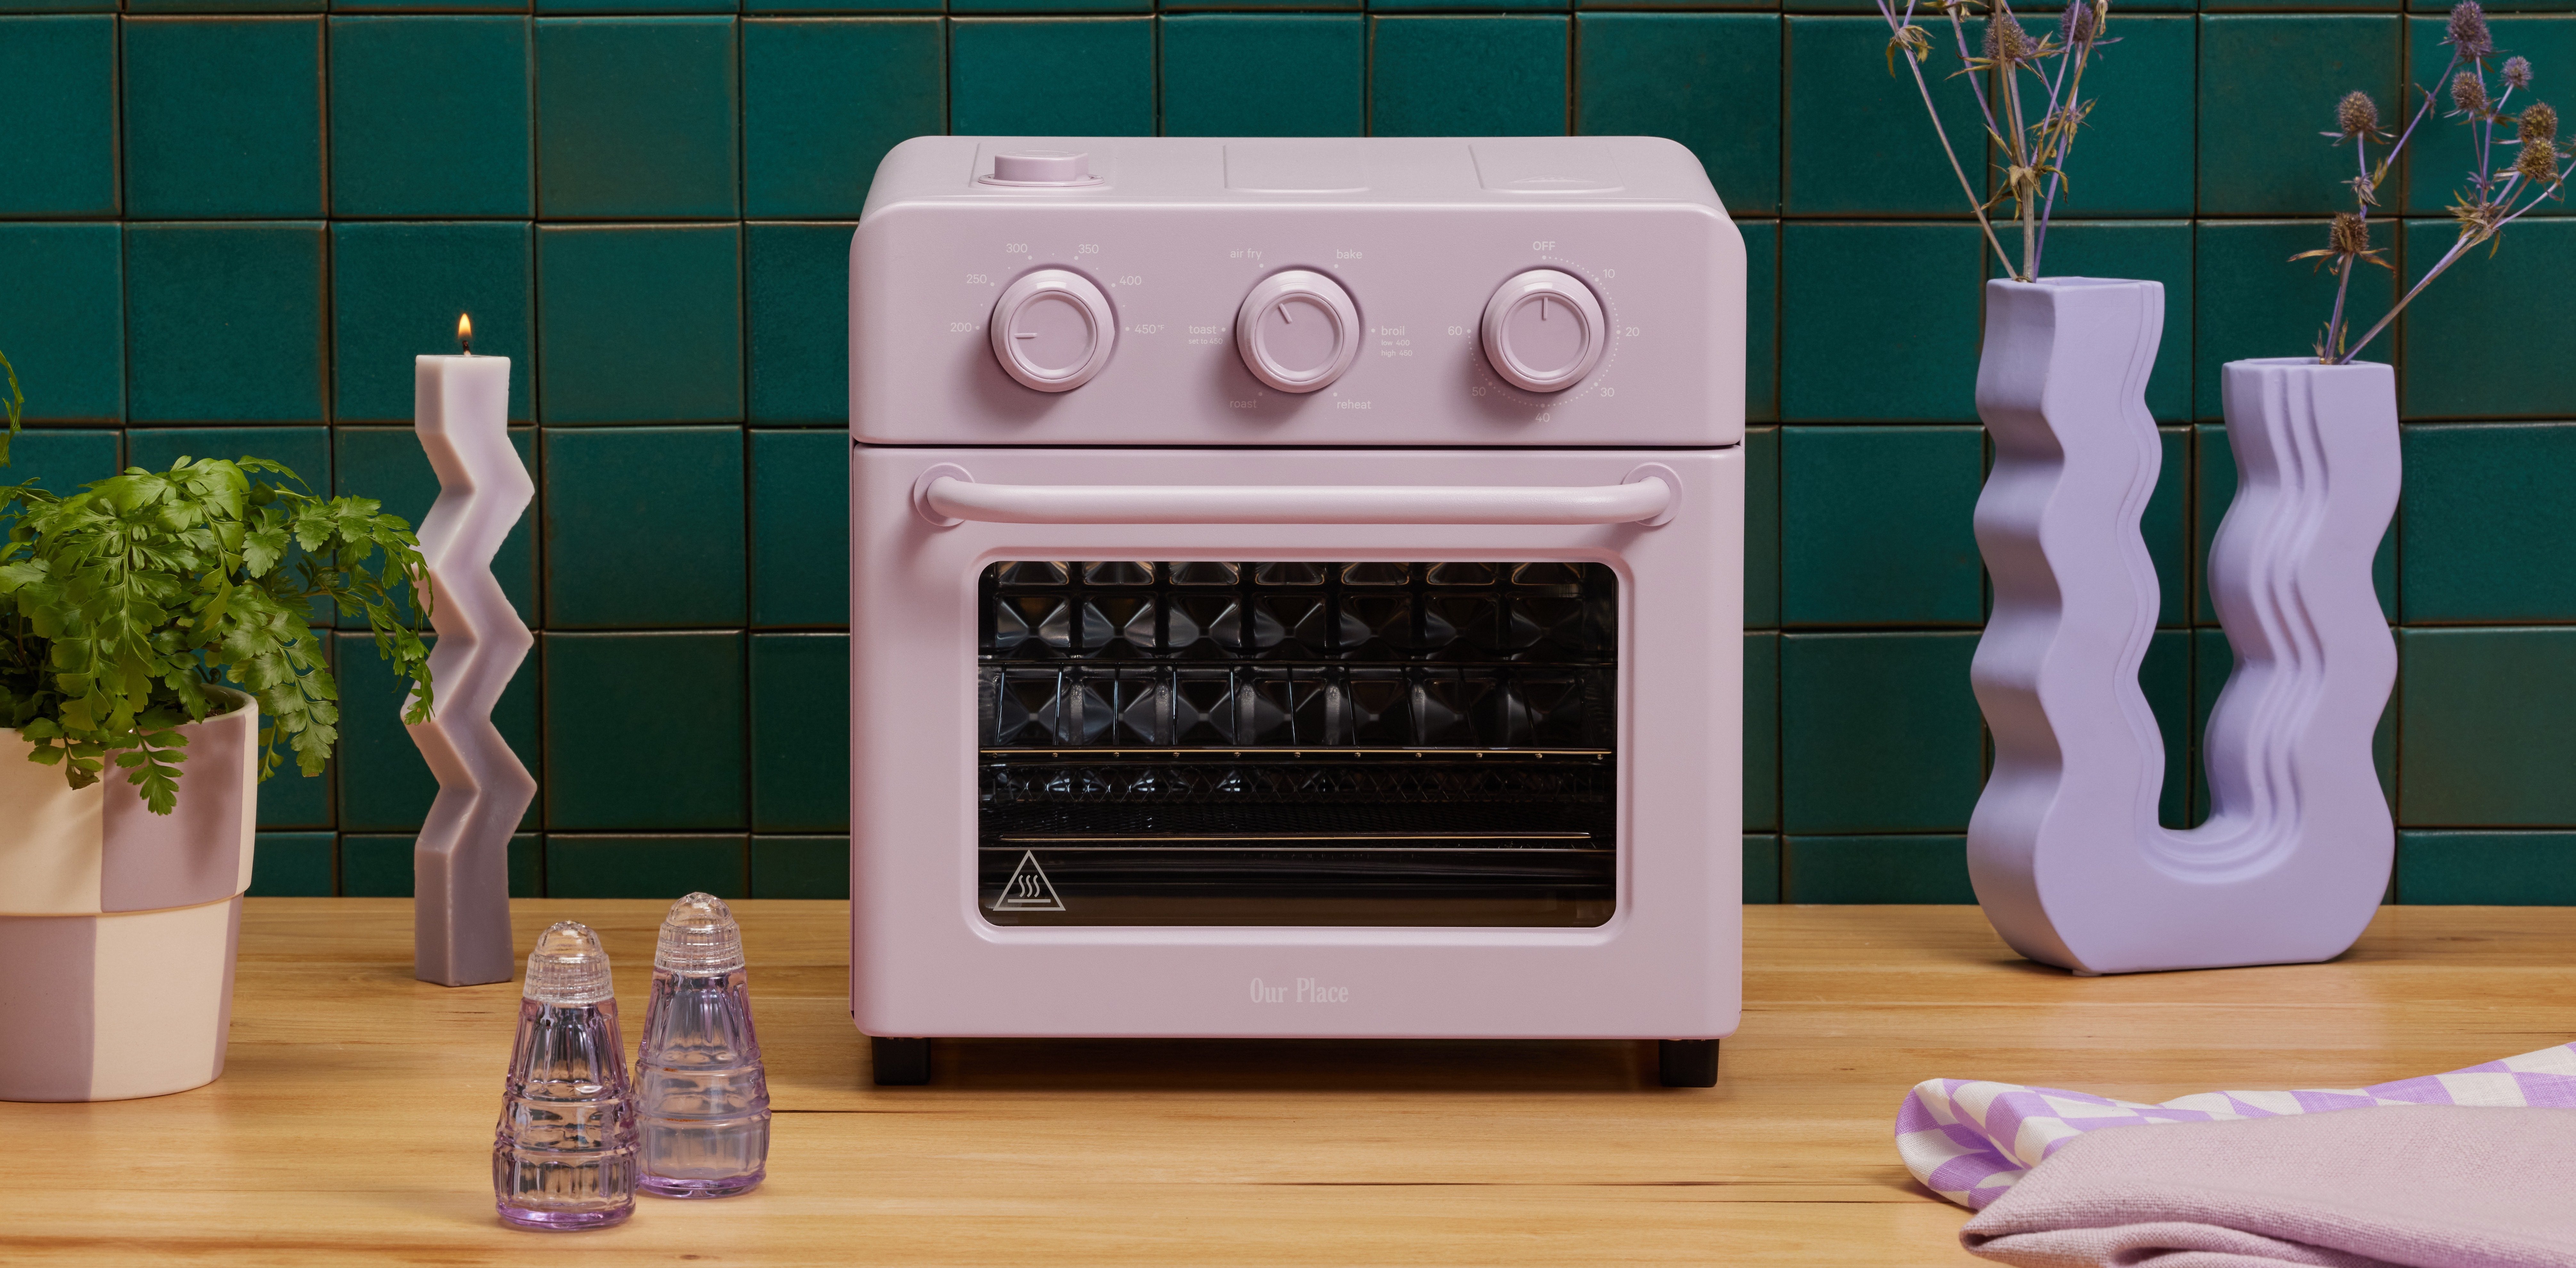 The Oven | The Wonder Oven Accessories 6-in-1 Char